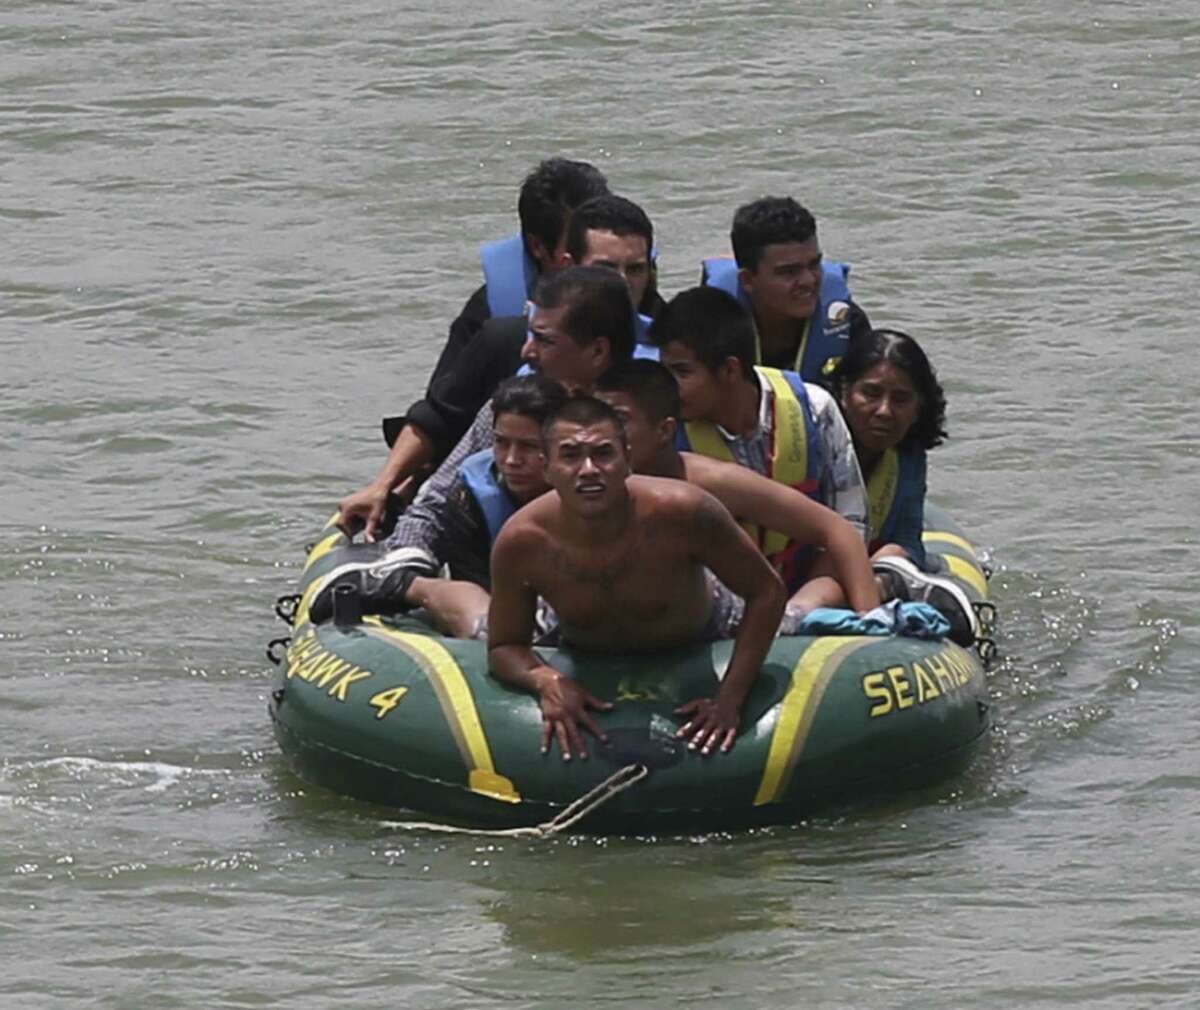 Using an inflatable raft, smugglers, carry immigrants across the Rio Grande near the international bridge in Roma. Law officials say higher-risk smuggling operations are moving into Starr County to avoid areas now saturated with officers.